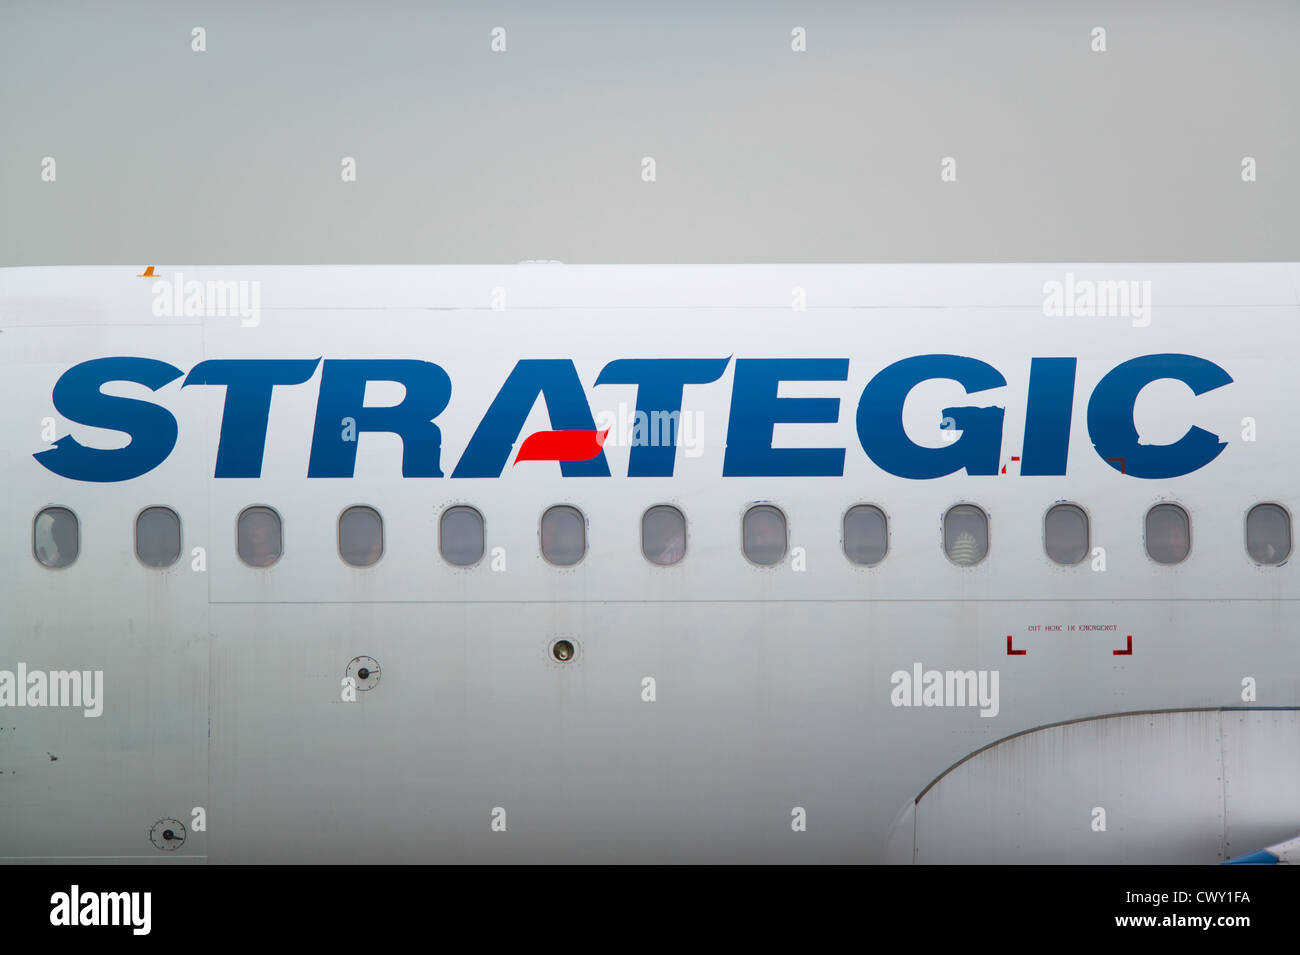 A close up of the Strategic logo on the fuselage of a passenger aircraft (Editorial use only) Stock Photo